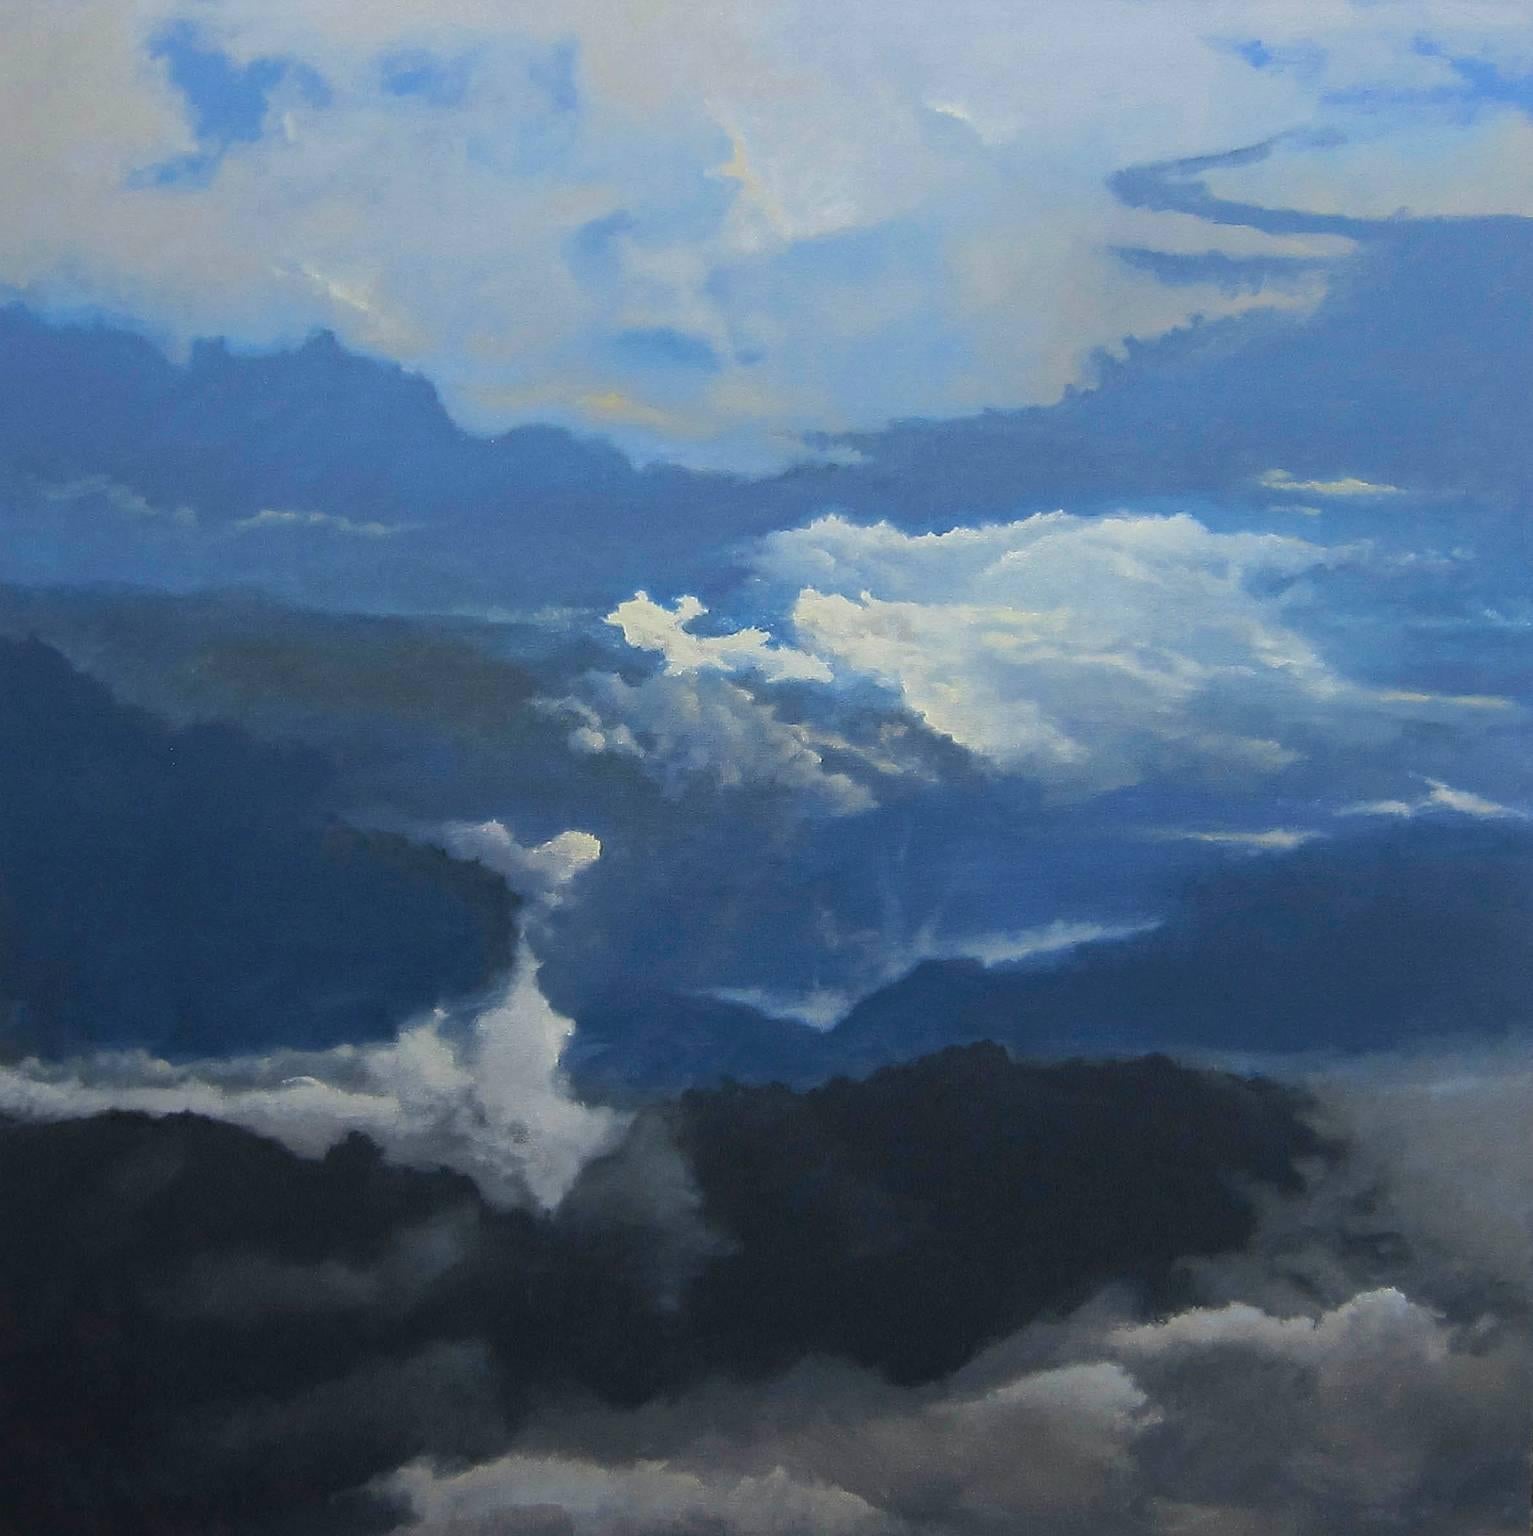 Howard Nathenson Landscape Painting - “Skylands”, swirling atmosphere in blues and white